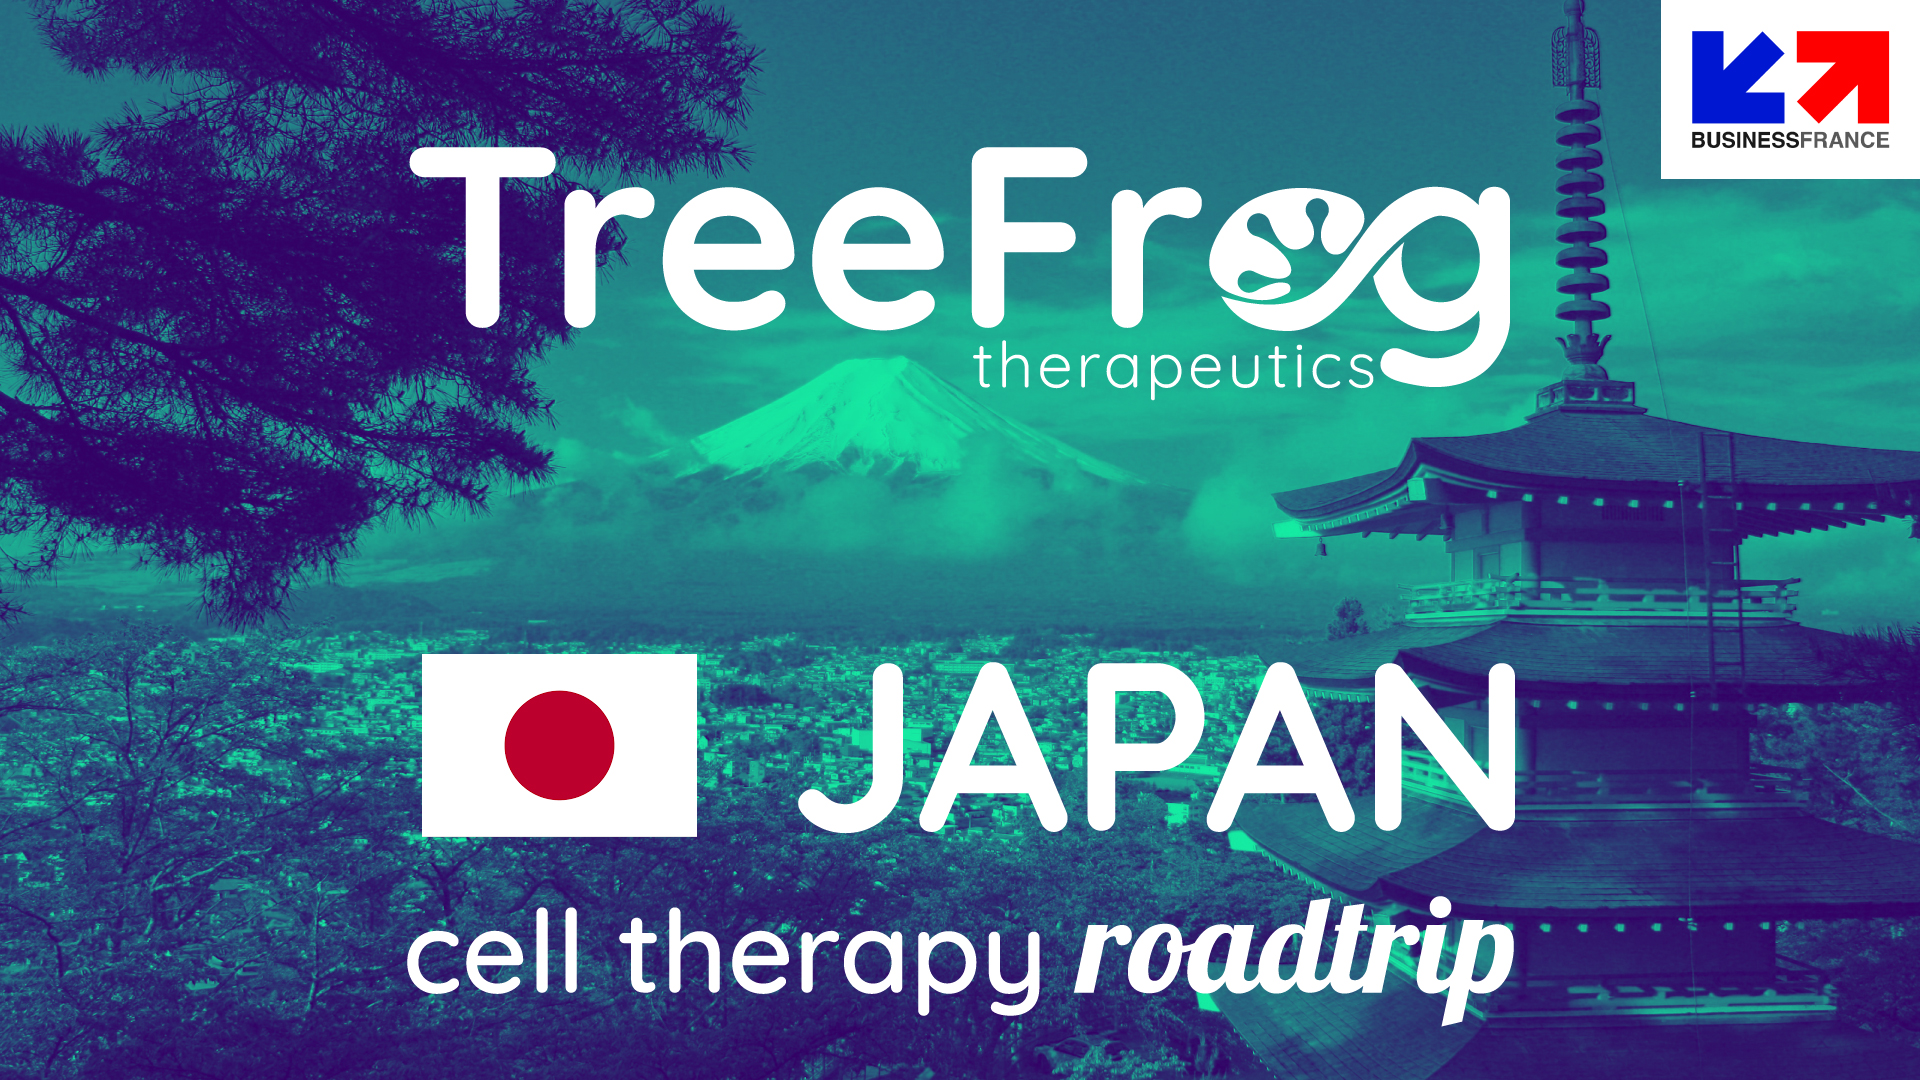 Cell therapy roadtrip in Japan